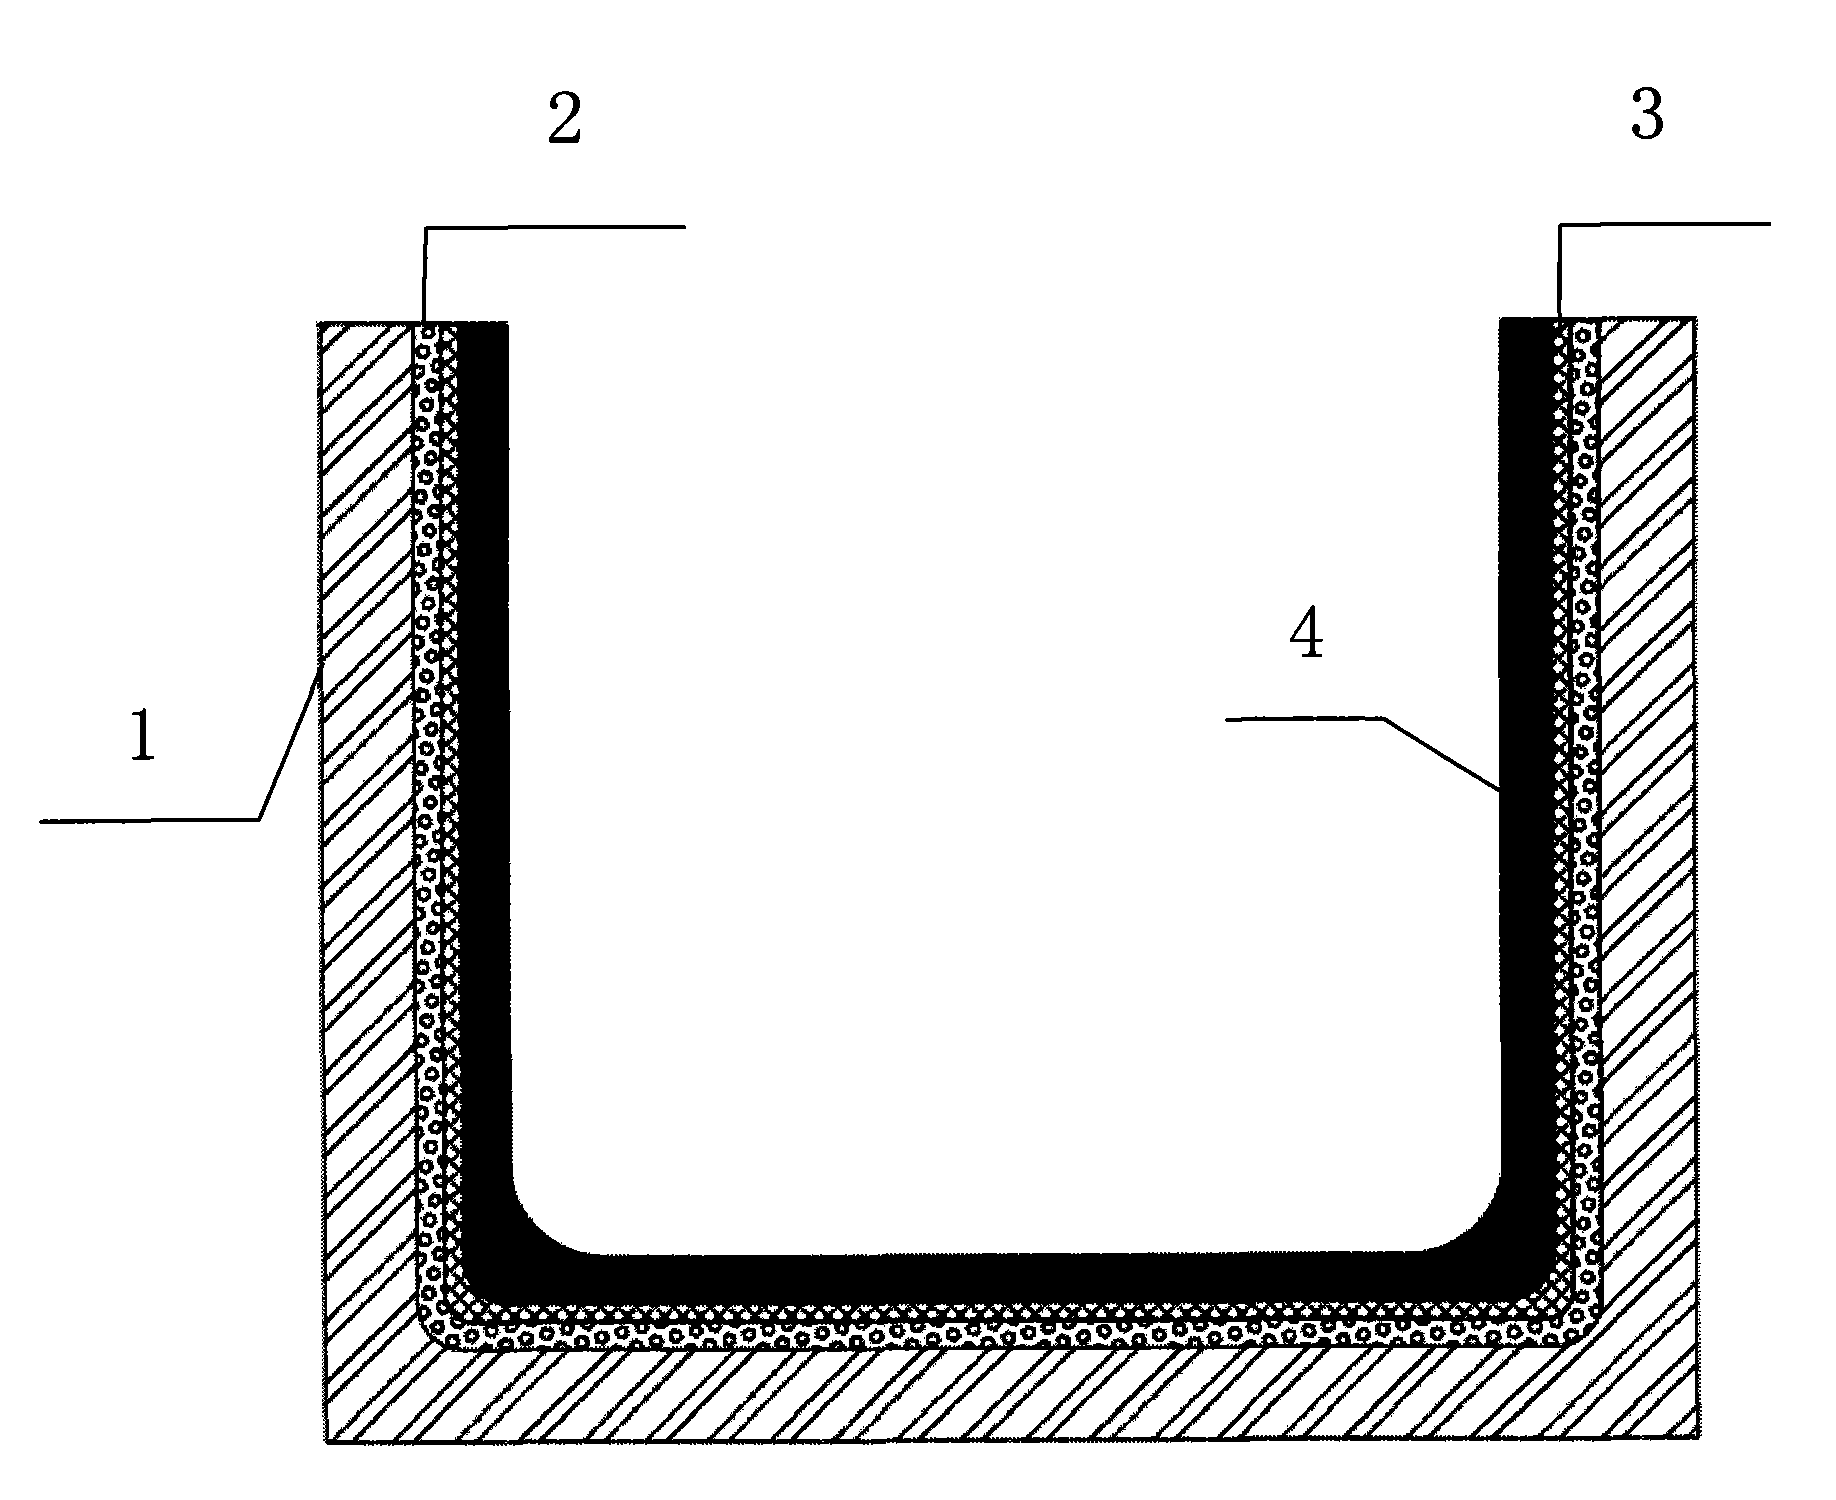 Quartz crucible with composite coating layers for preparing polycrystalline silicon ingot